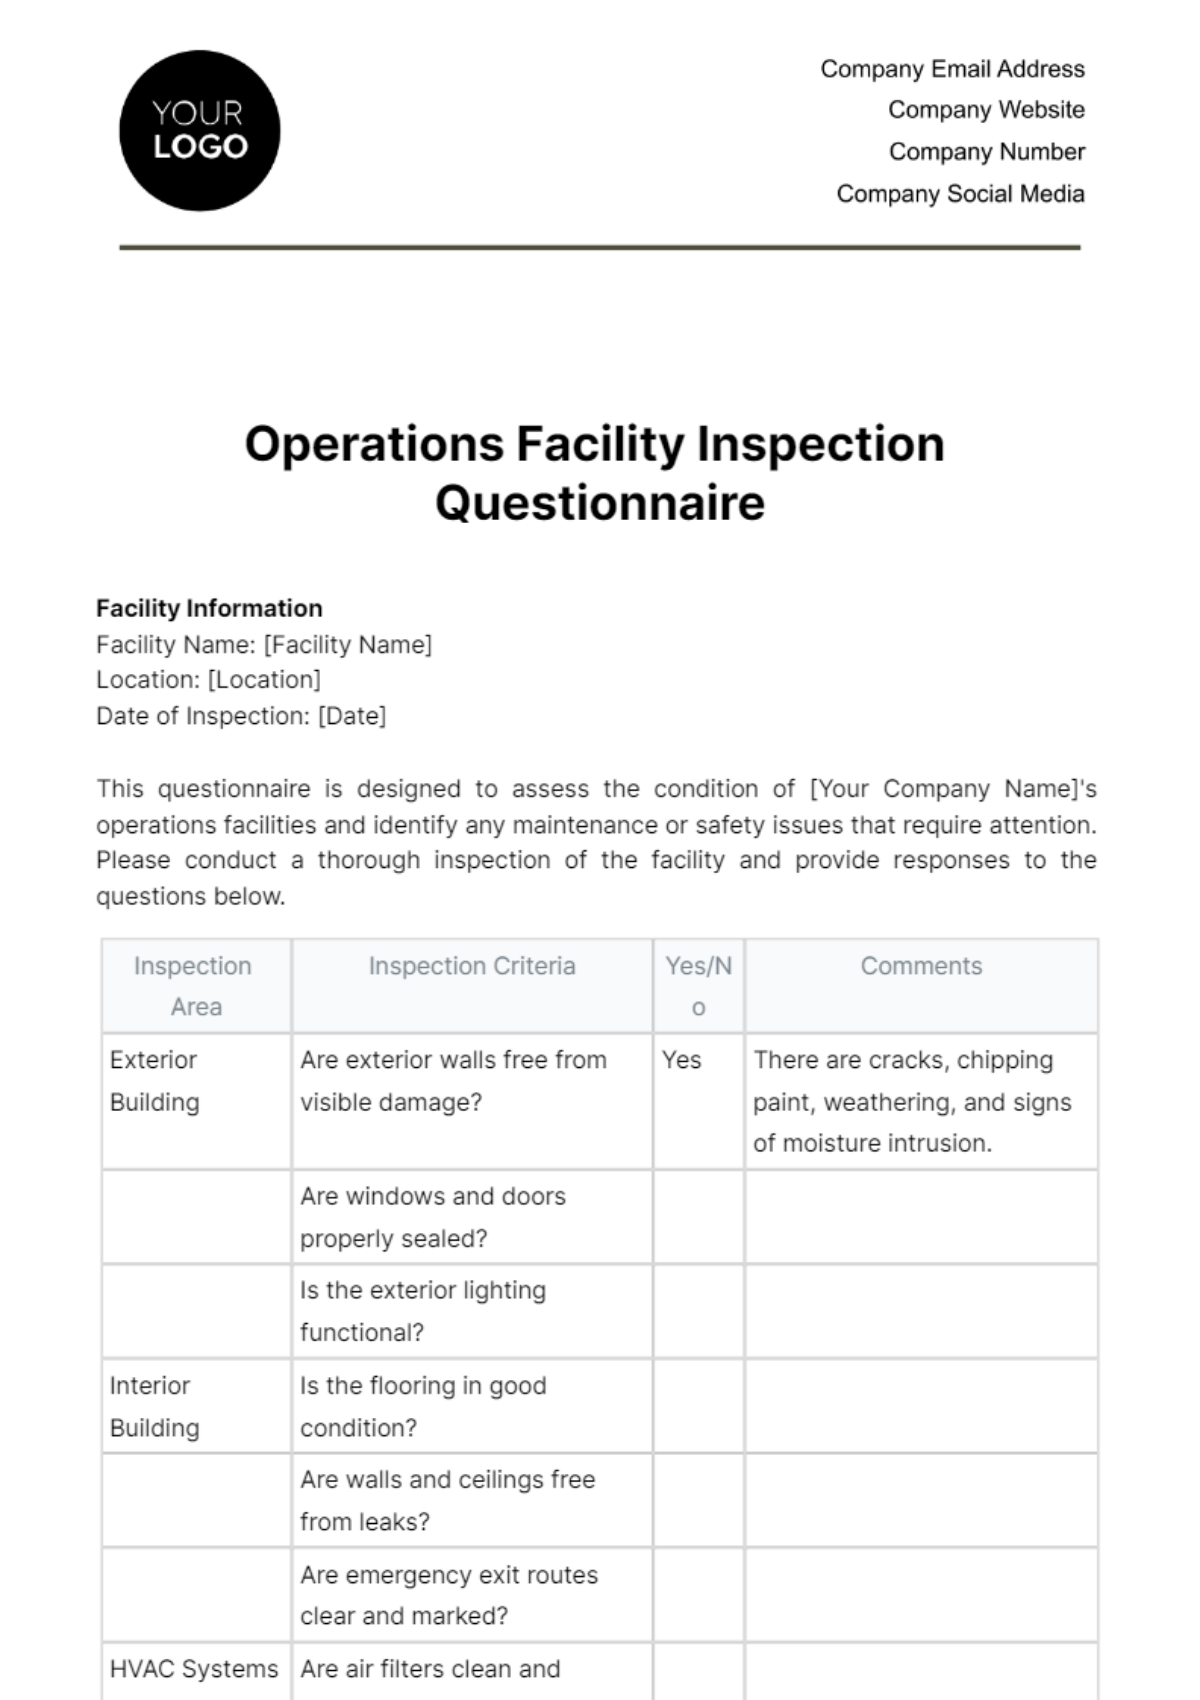 Operations Facility Inspection Questionnaire Template